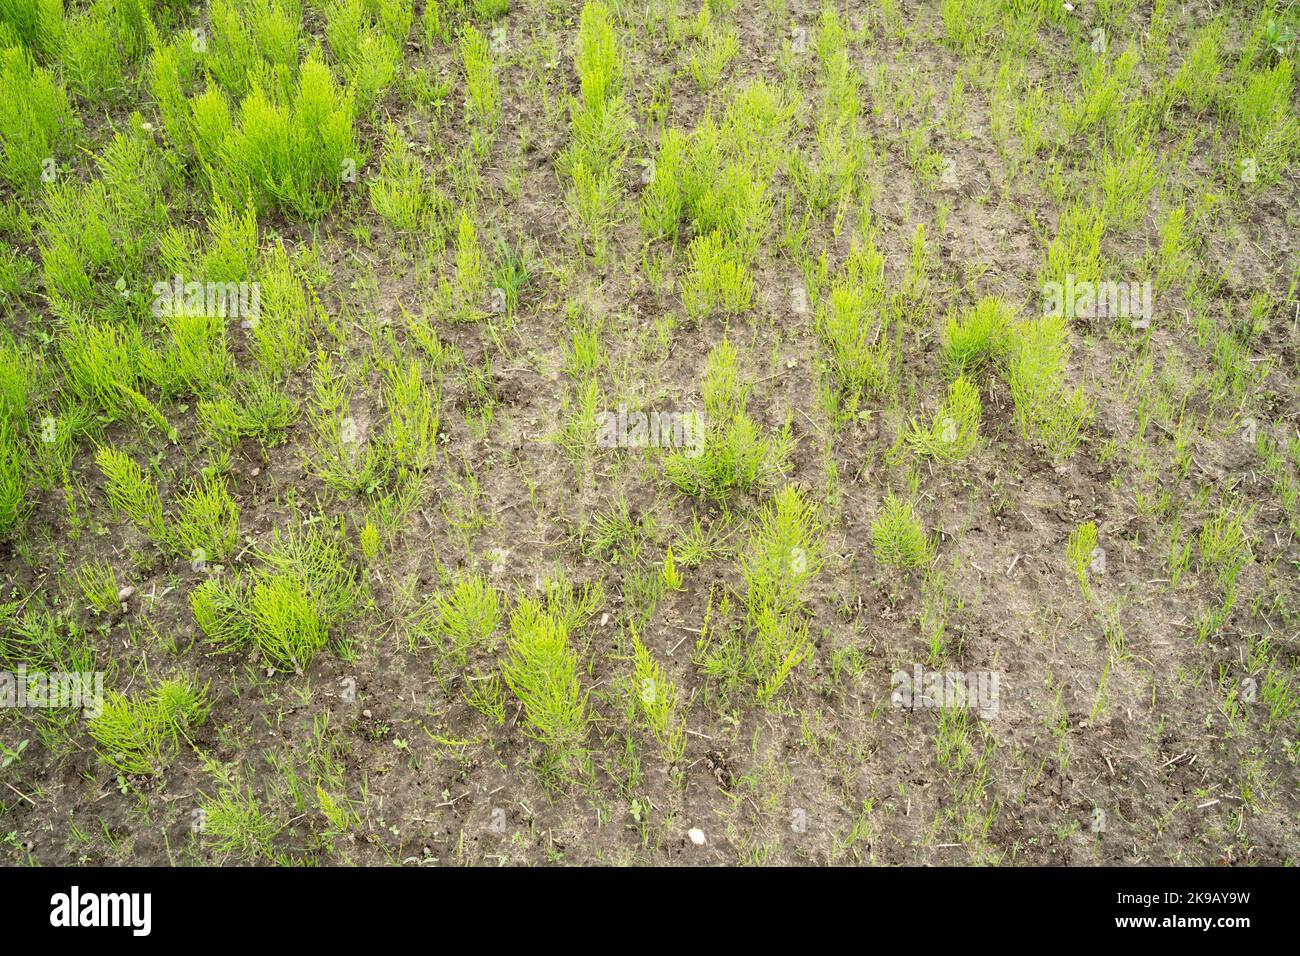 A large group of Field horsetail, Equisetum arvense growing on an agricultural field in Estonia, Northern Europe Stock Photo